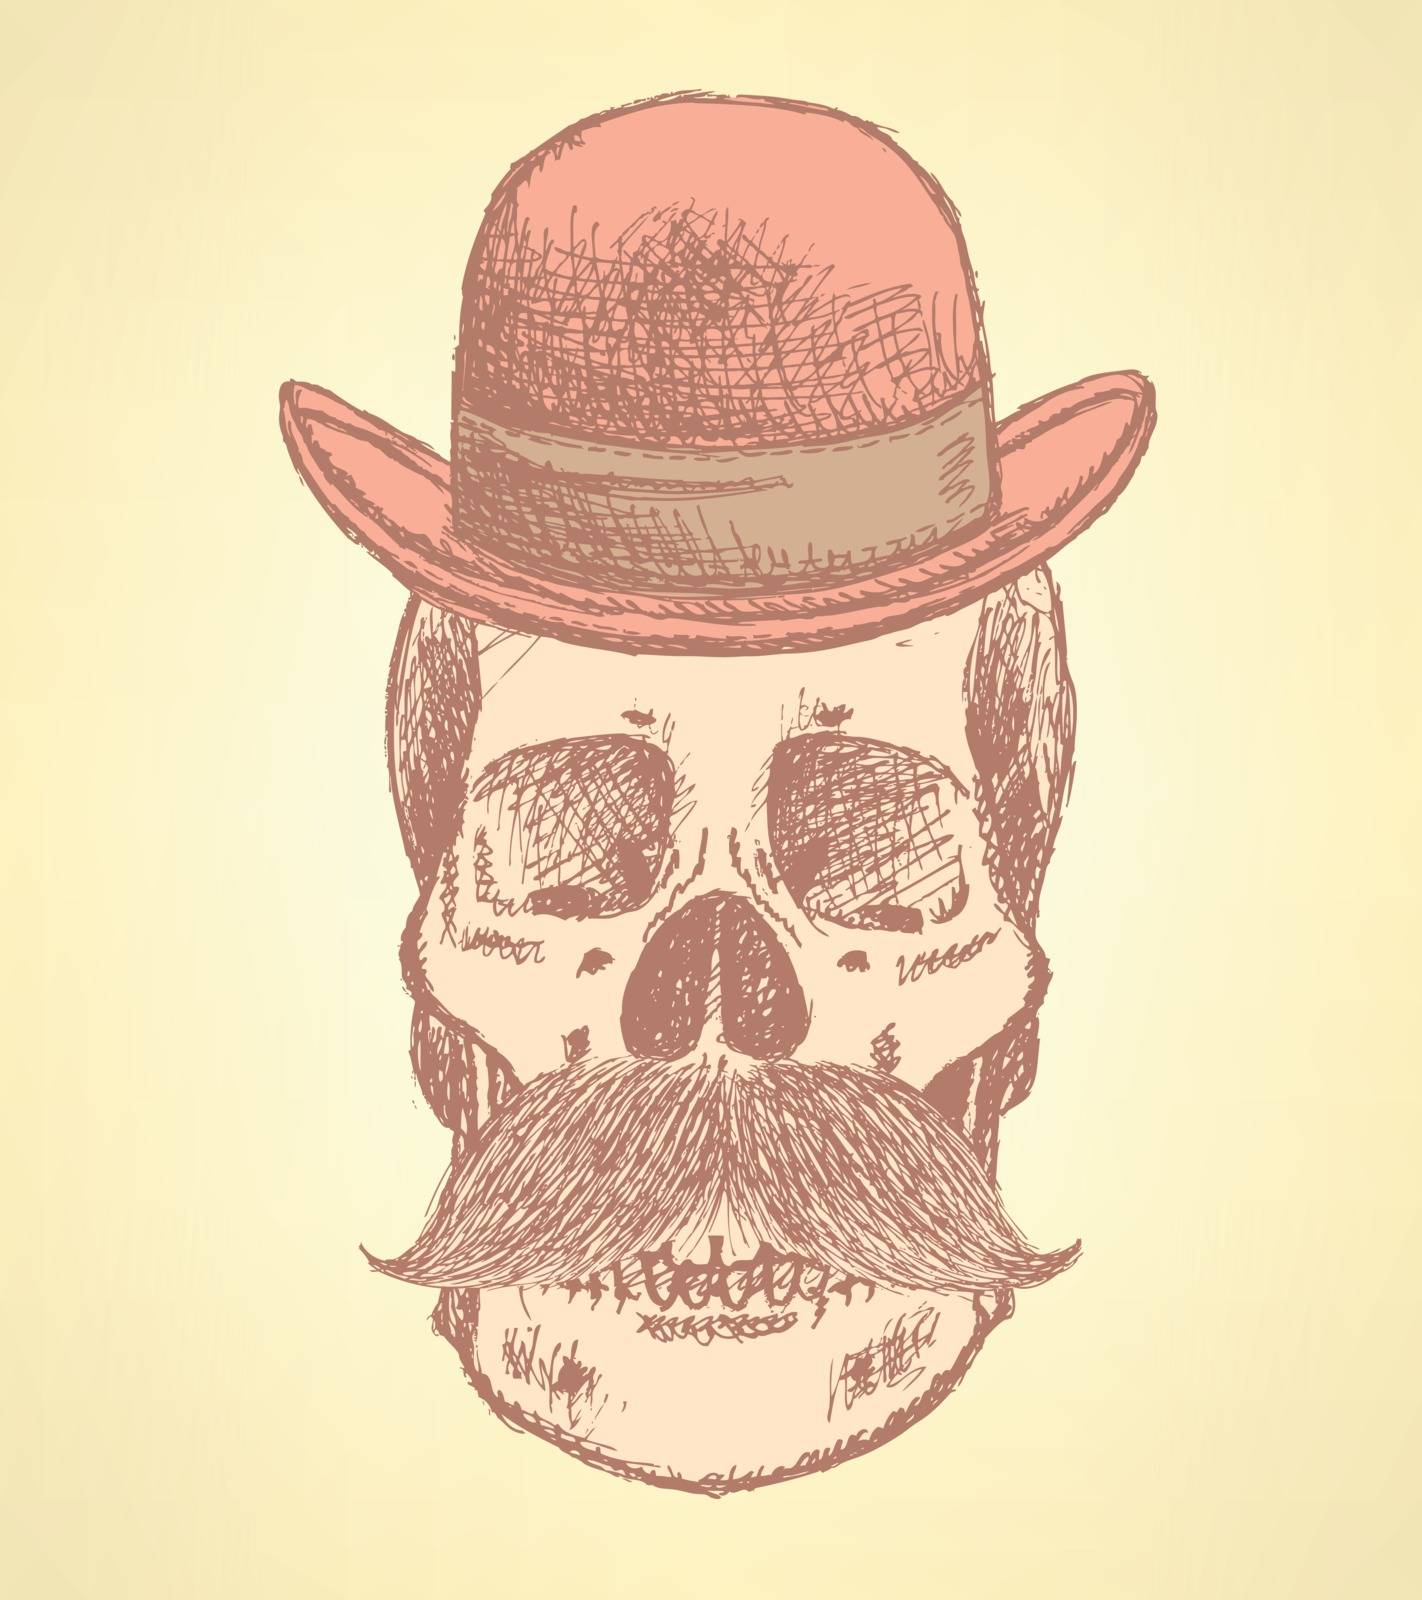 Sketch scull with mustache and in hat, background

